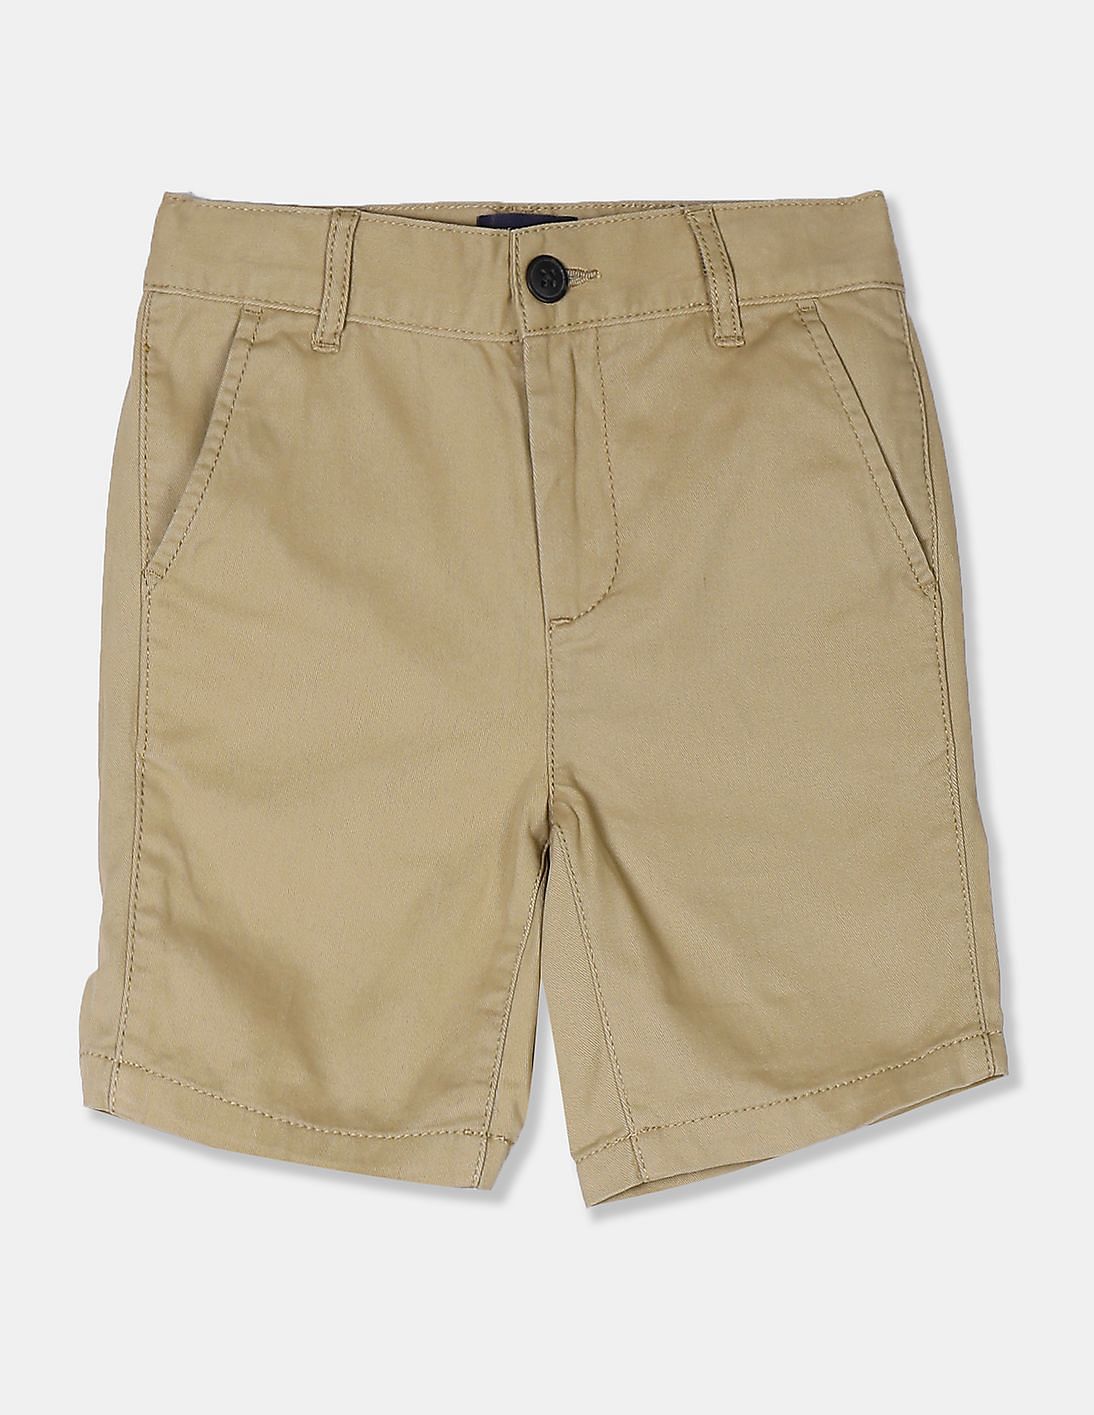 Buy The Children's Place Boys Boys Beige Woven Chino Shorts - NNNOW.com